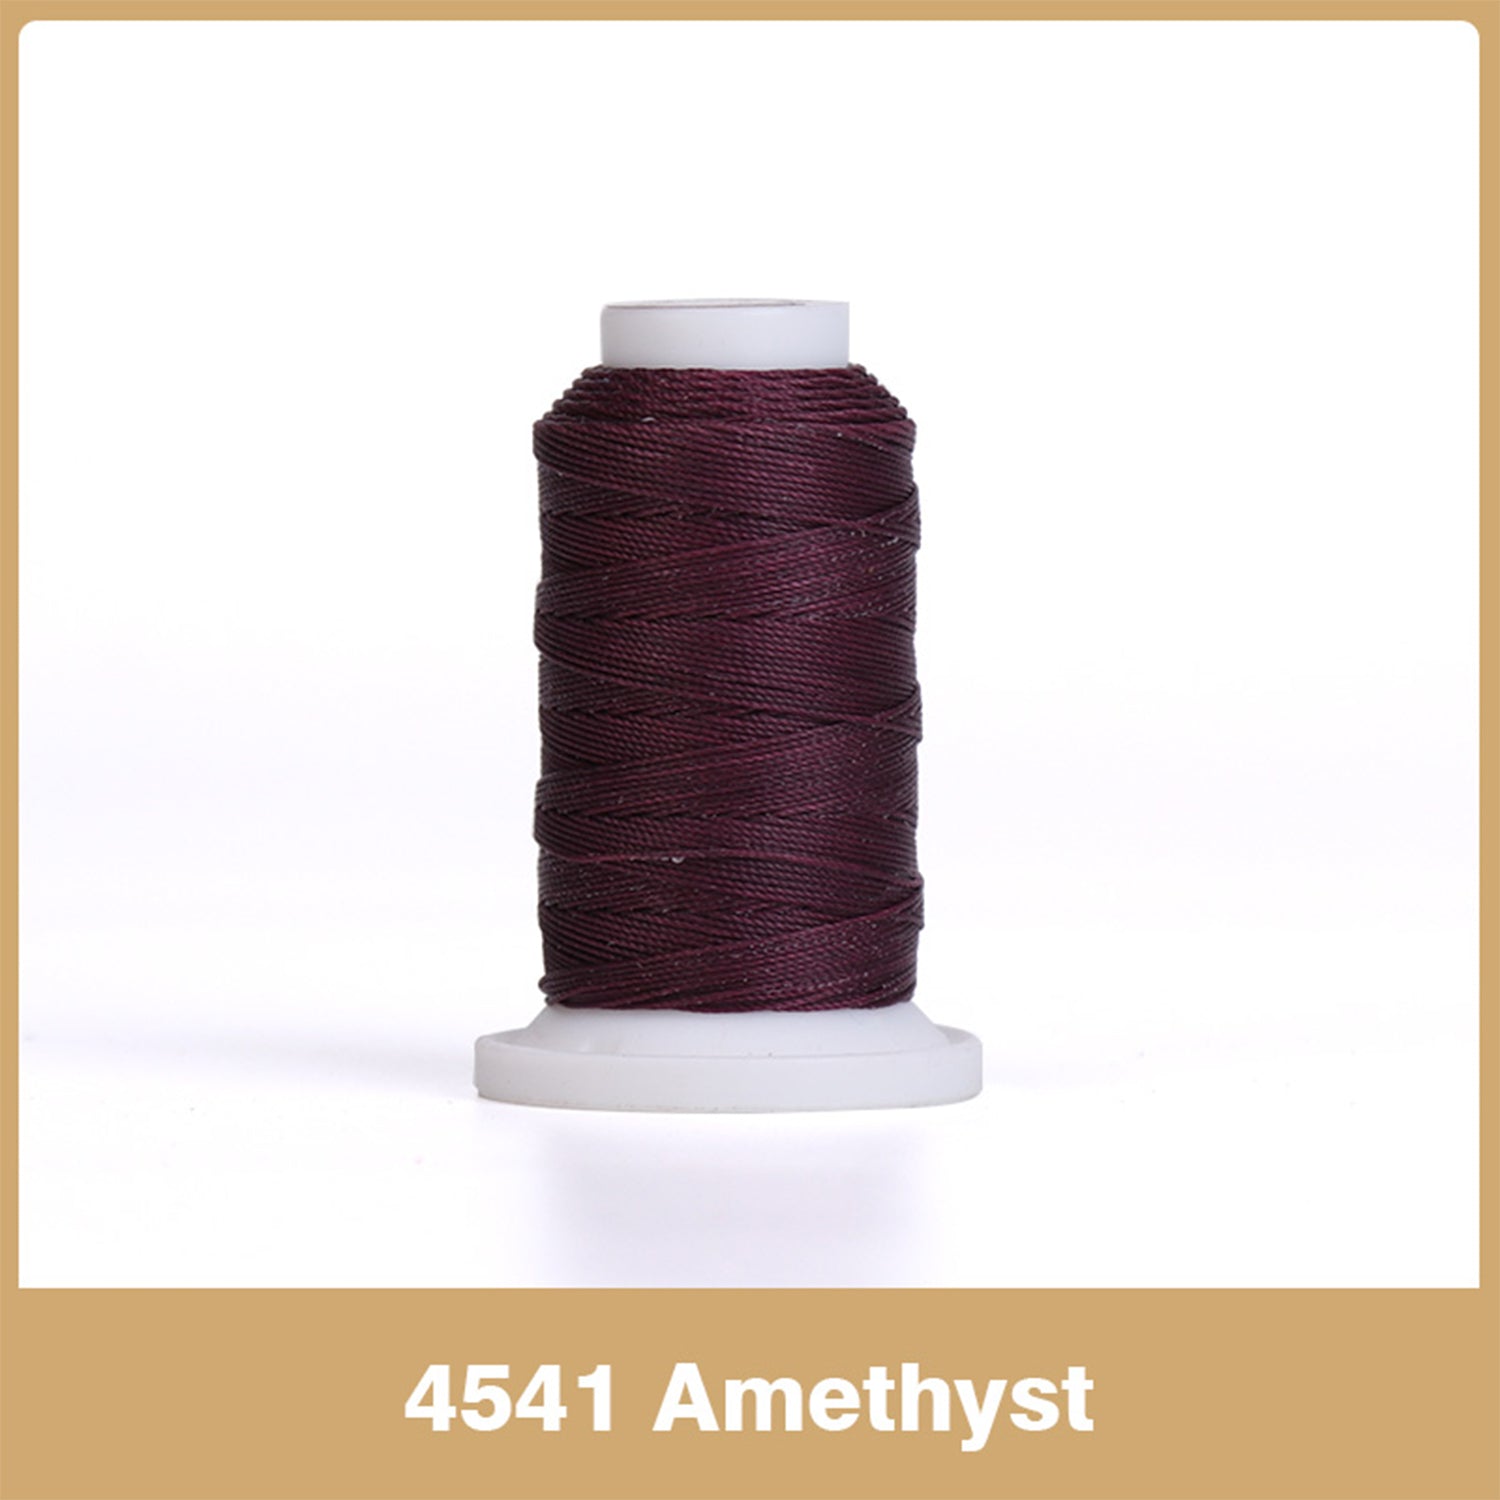 15 Colors Waxed Thread, Leather Sewing Thread,Hand Stitching